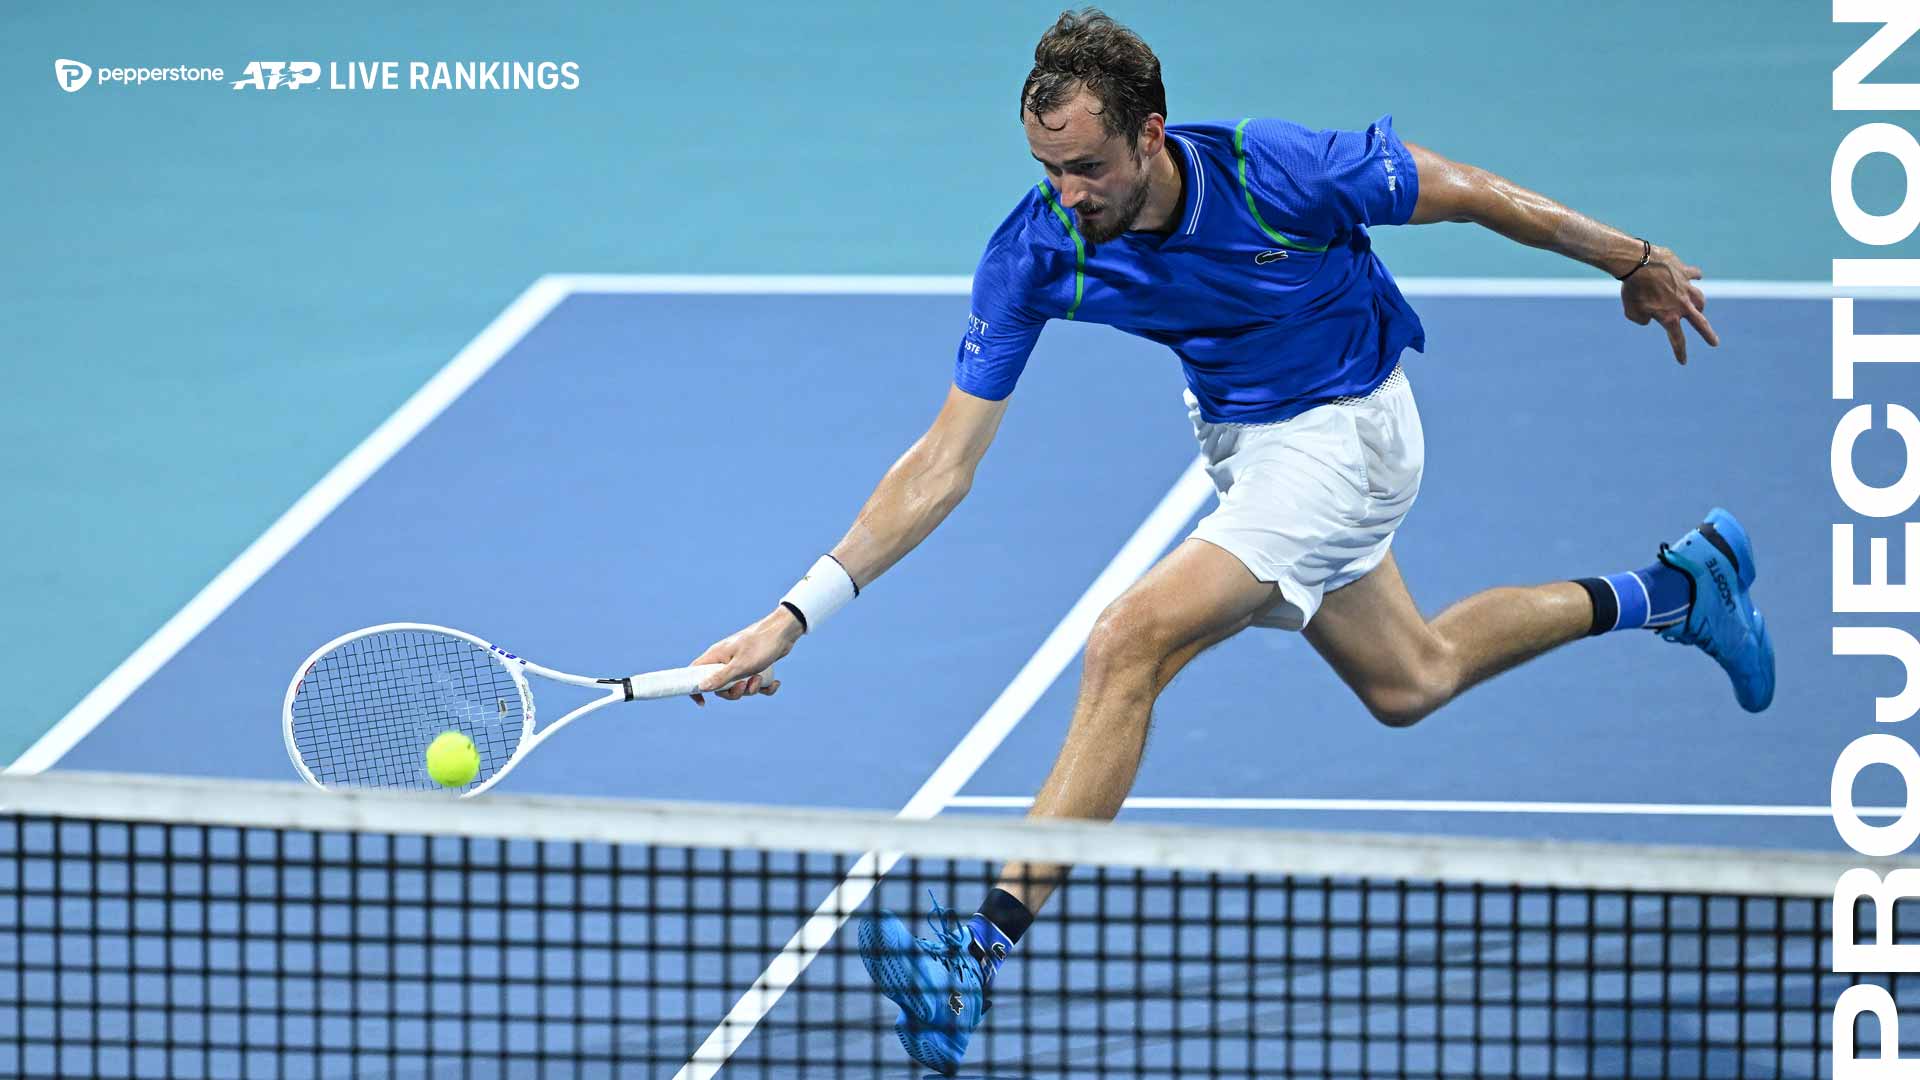 Daniil Medvedev will climb to World No. 4 in the Pepperstone ATP Rankings on Monday.